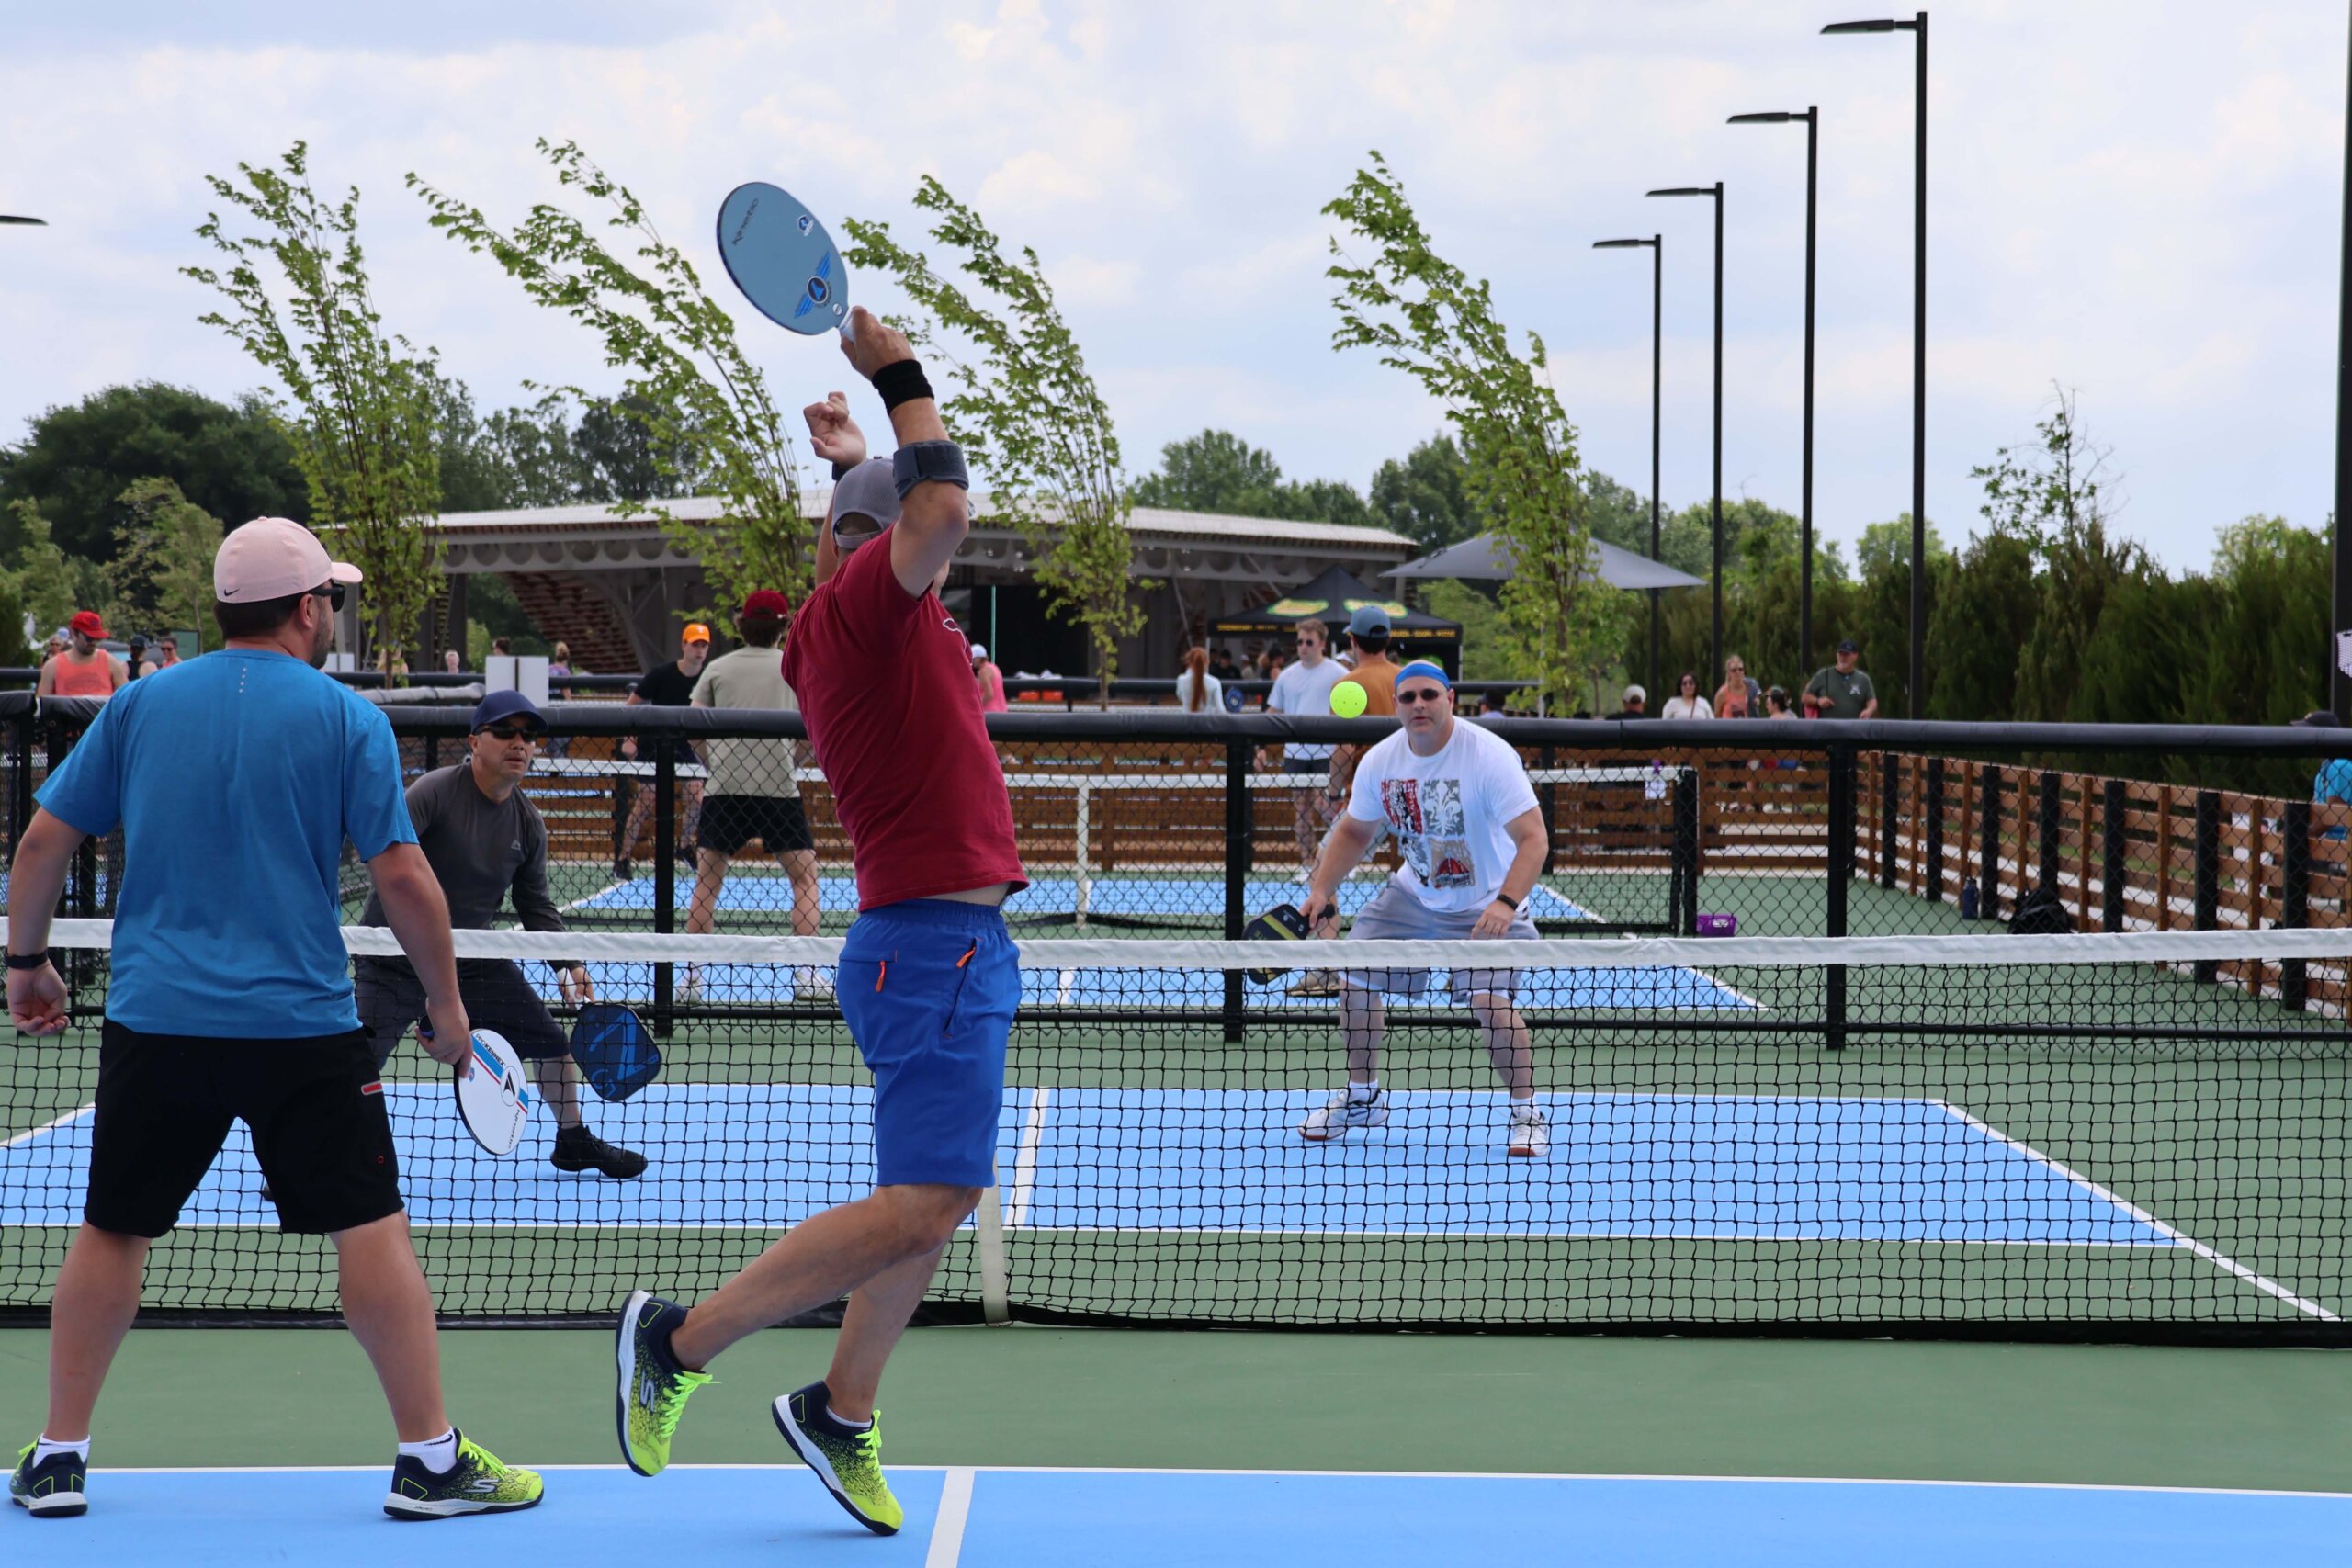 Pickleball players at Osage Park